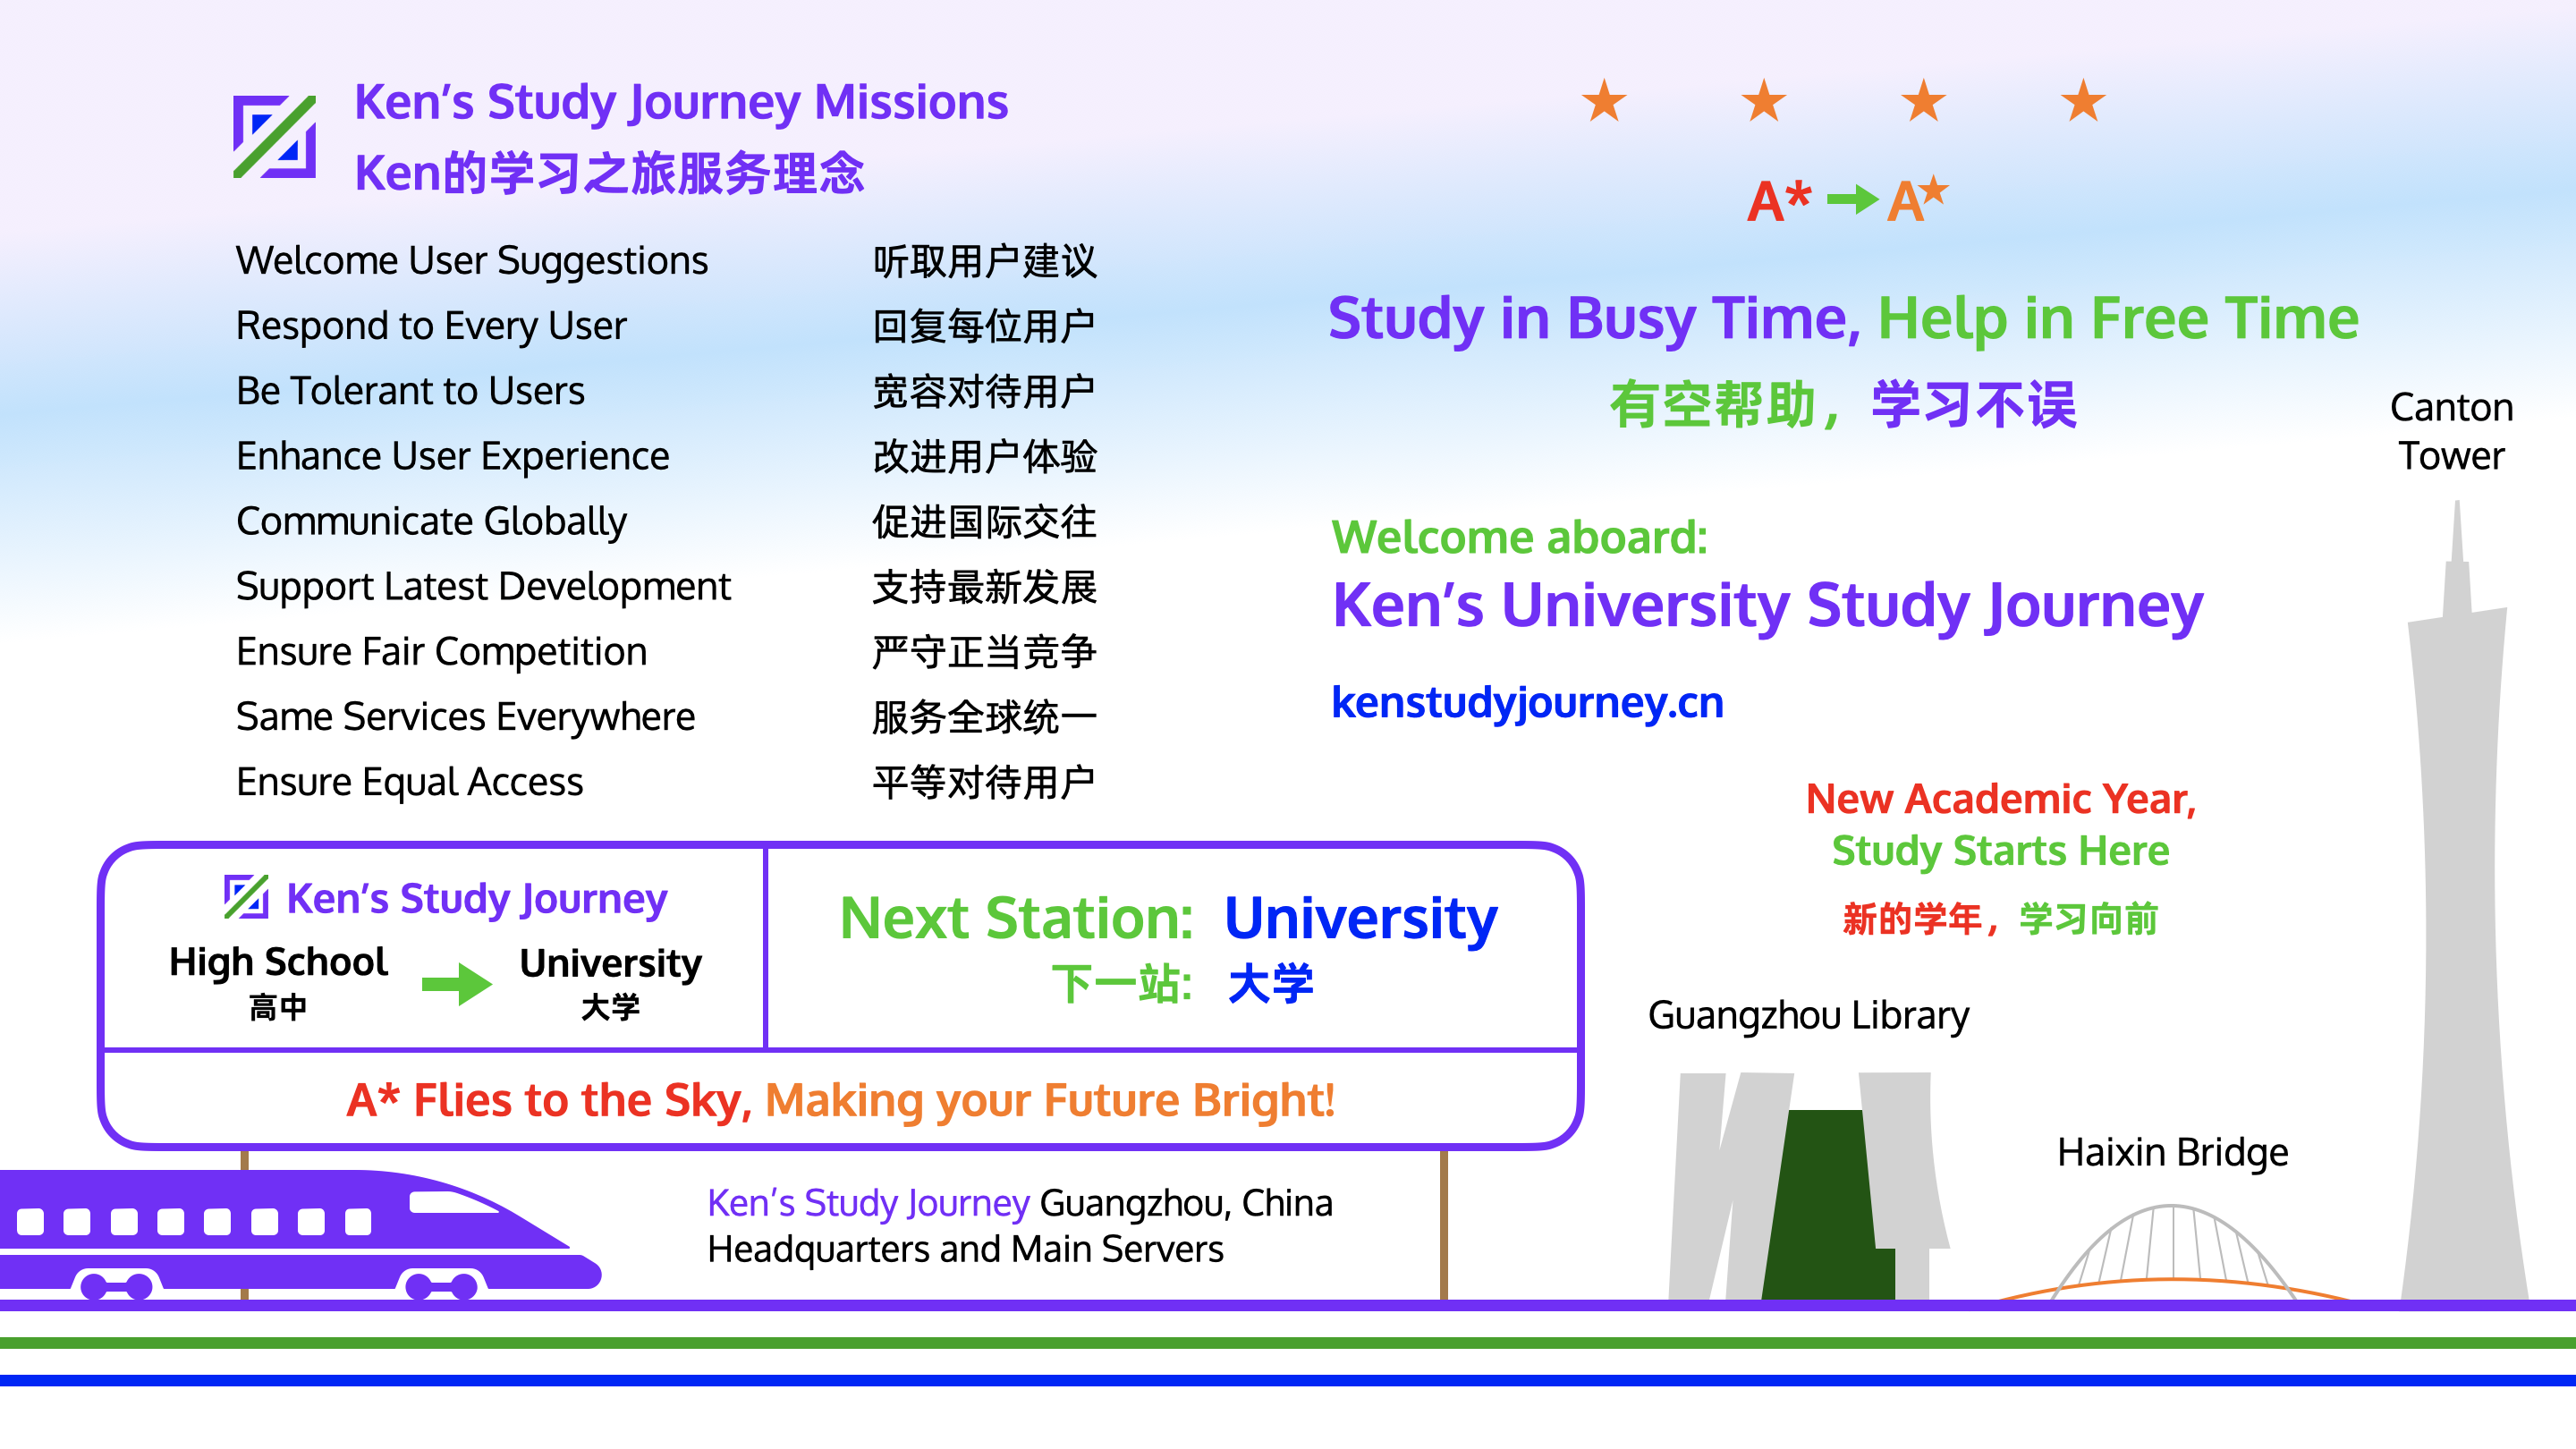 Ken's Study Journey Missions of Services